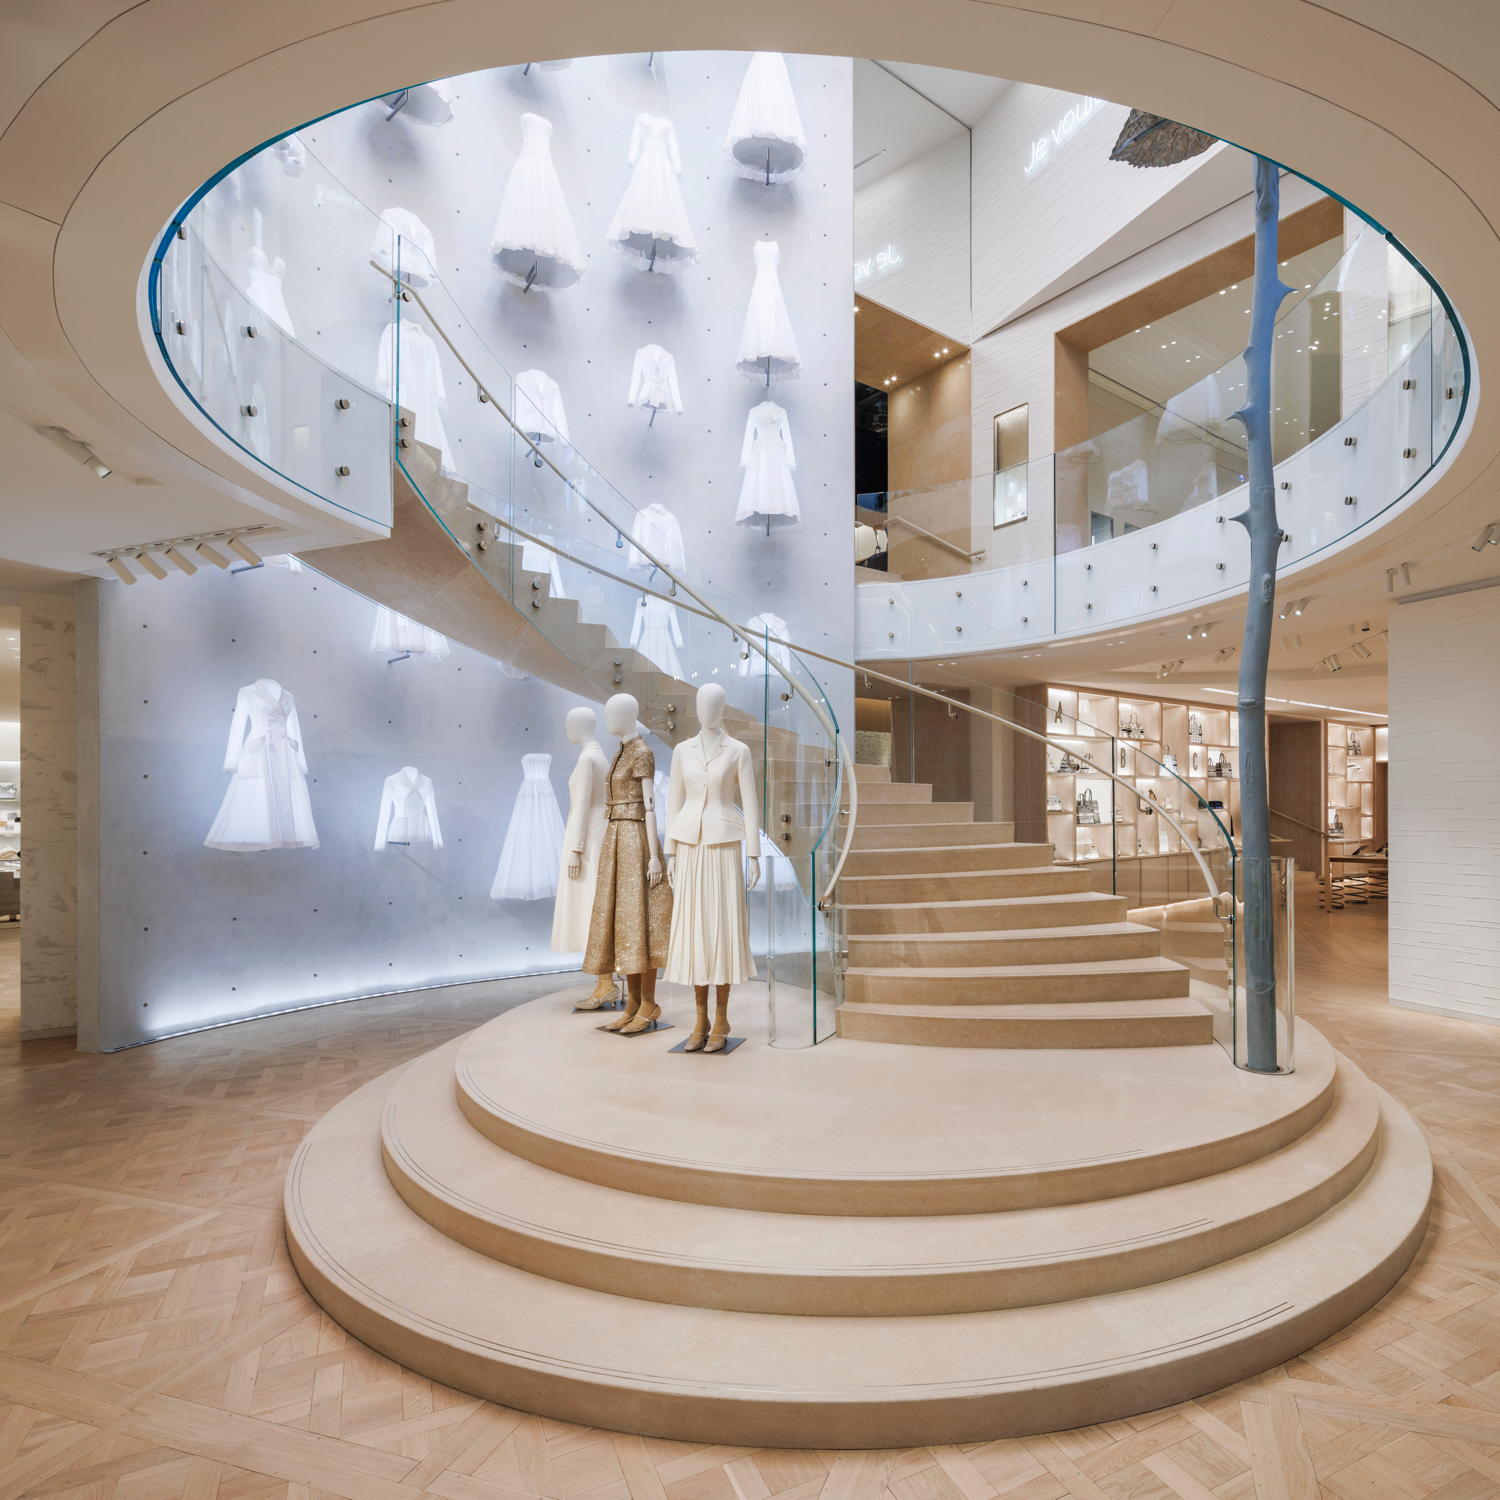 Louis Vuitton's London flagship reopens as a Peter Marino-designed